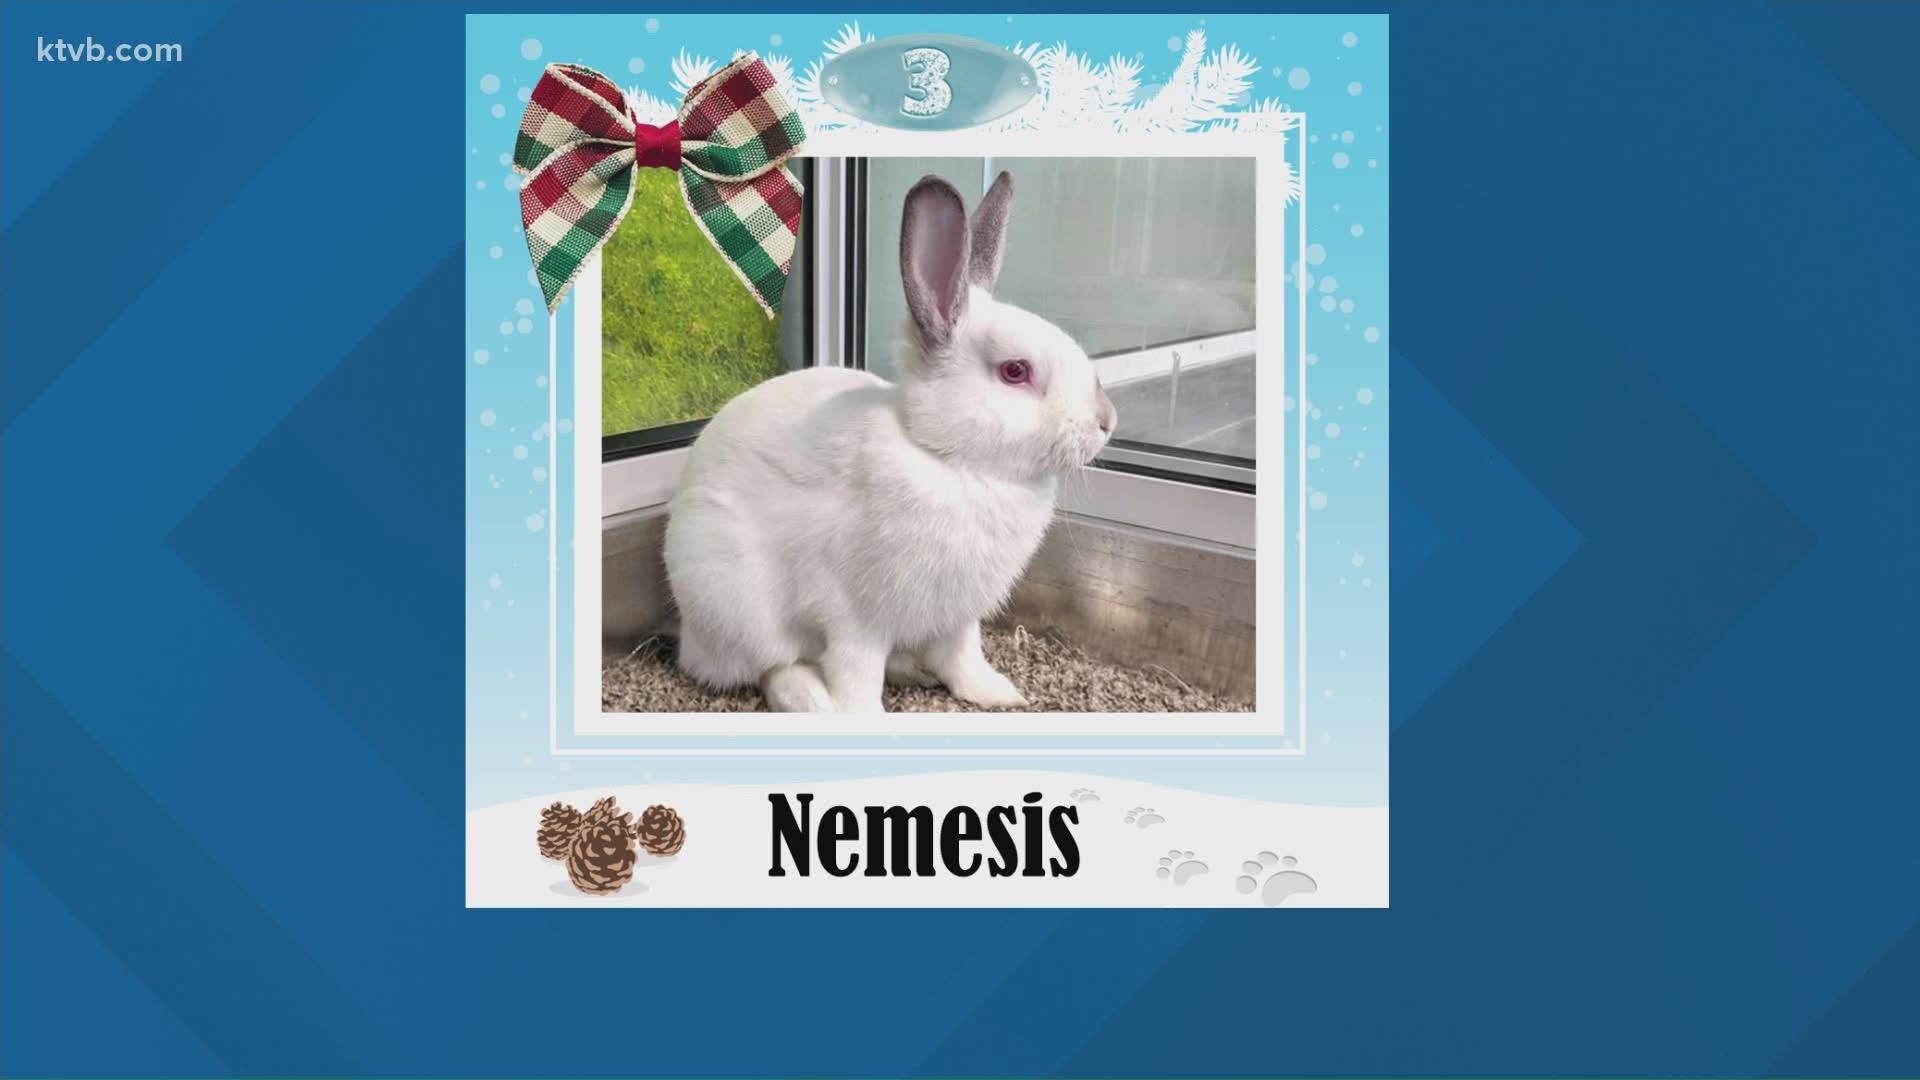 Nemesis is a one-year-old rabbit who likes to be held.